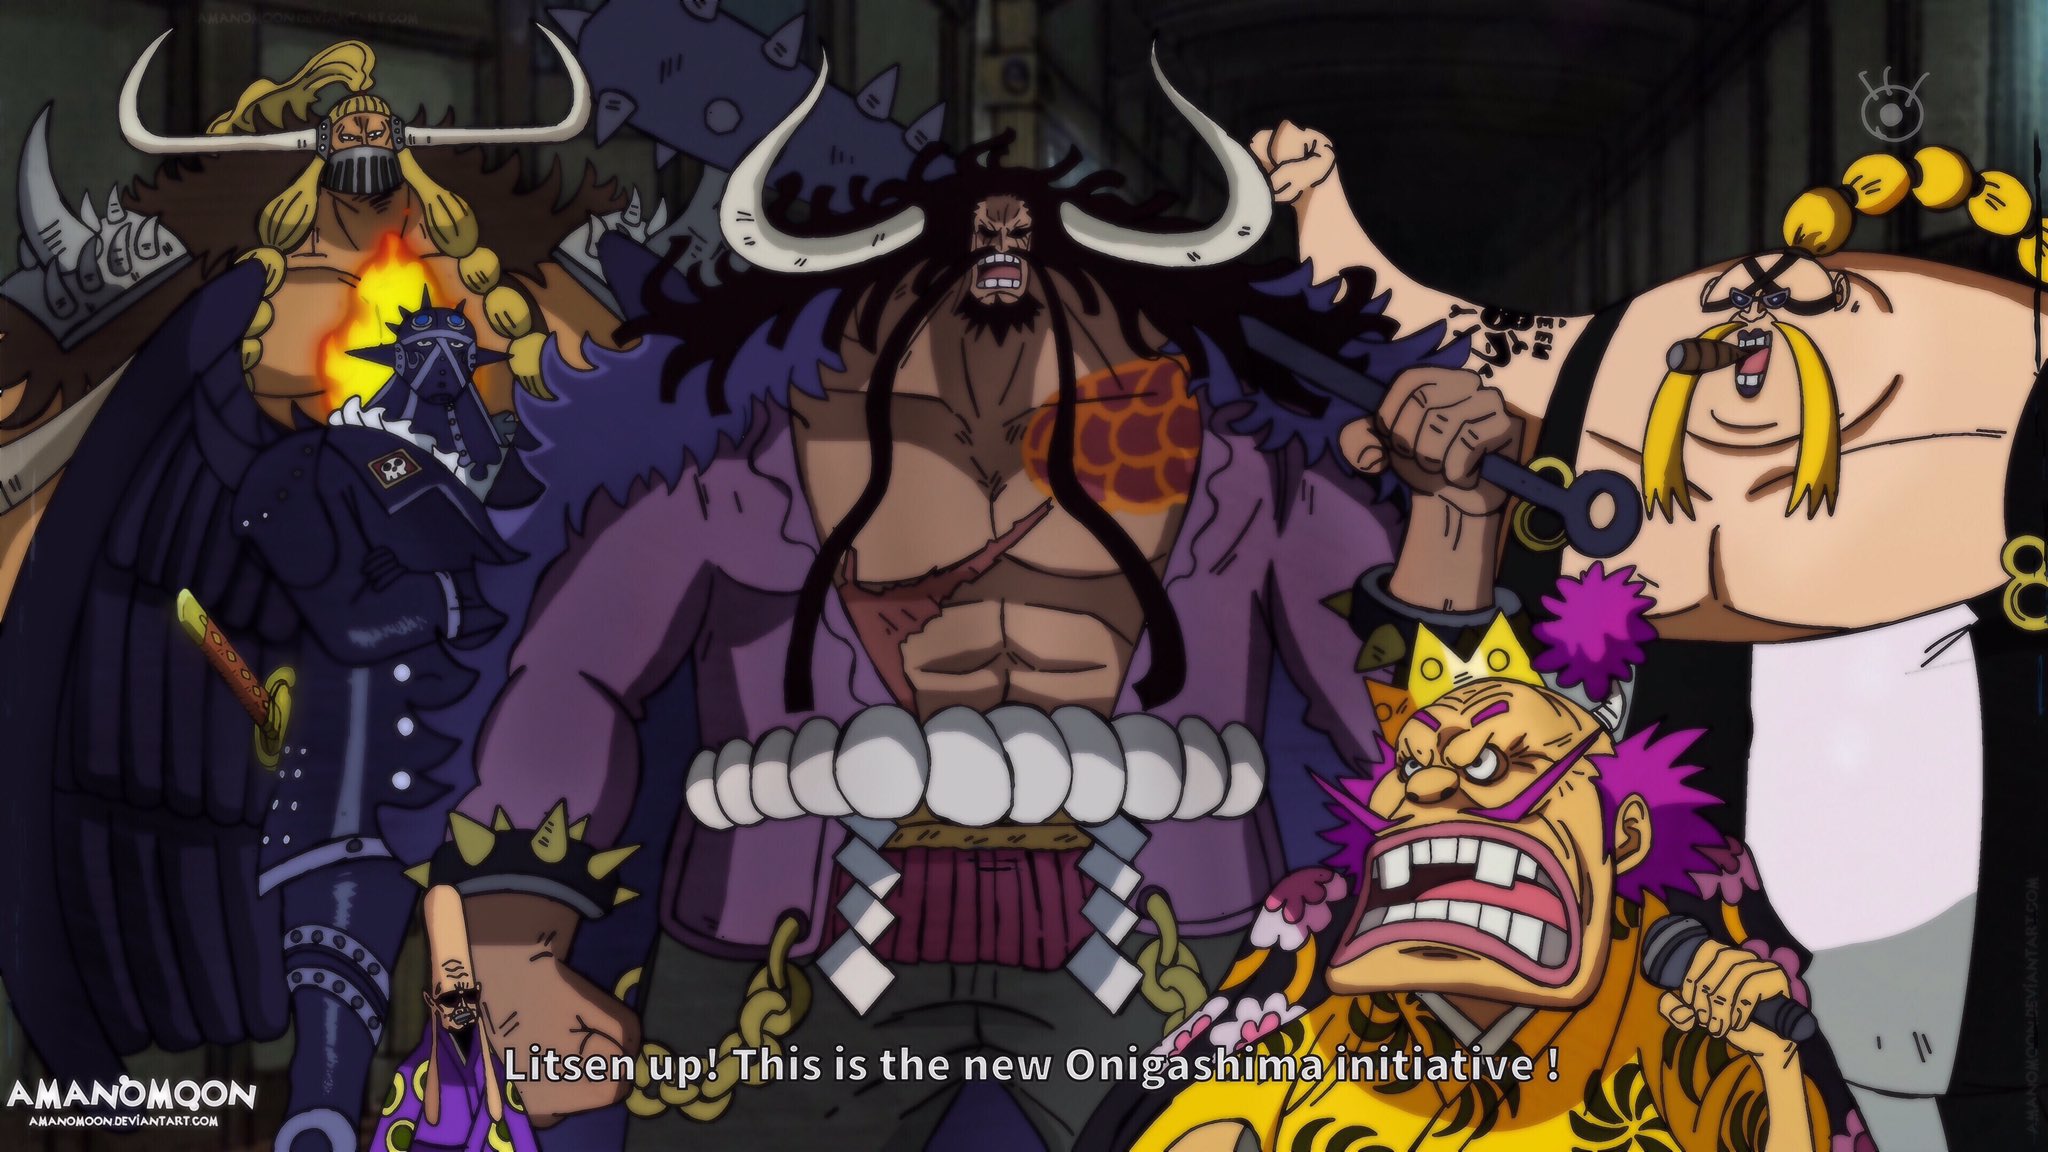 Pandaman One Piece アマノムーン ルフィ One Piece Chapter 984 Kaido S Crew And Orochi Anime Style Rt If You Want To Support Me Thanks T Co Hyej7zy39w ワンピース